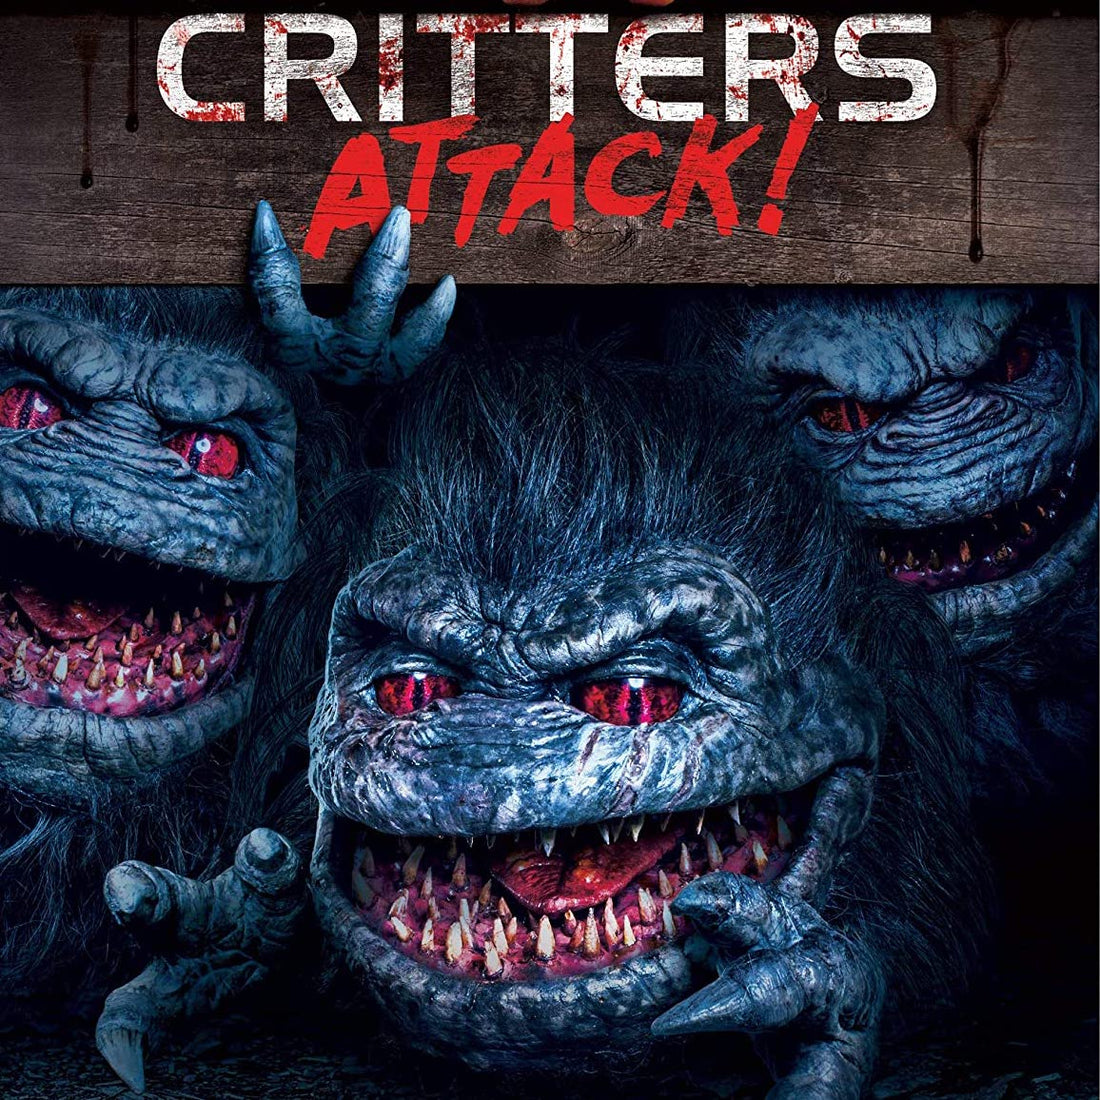 Episode 256: Critters Attack!